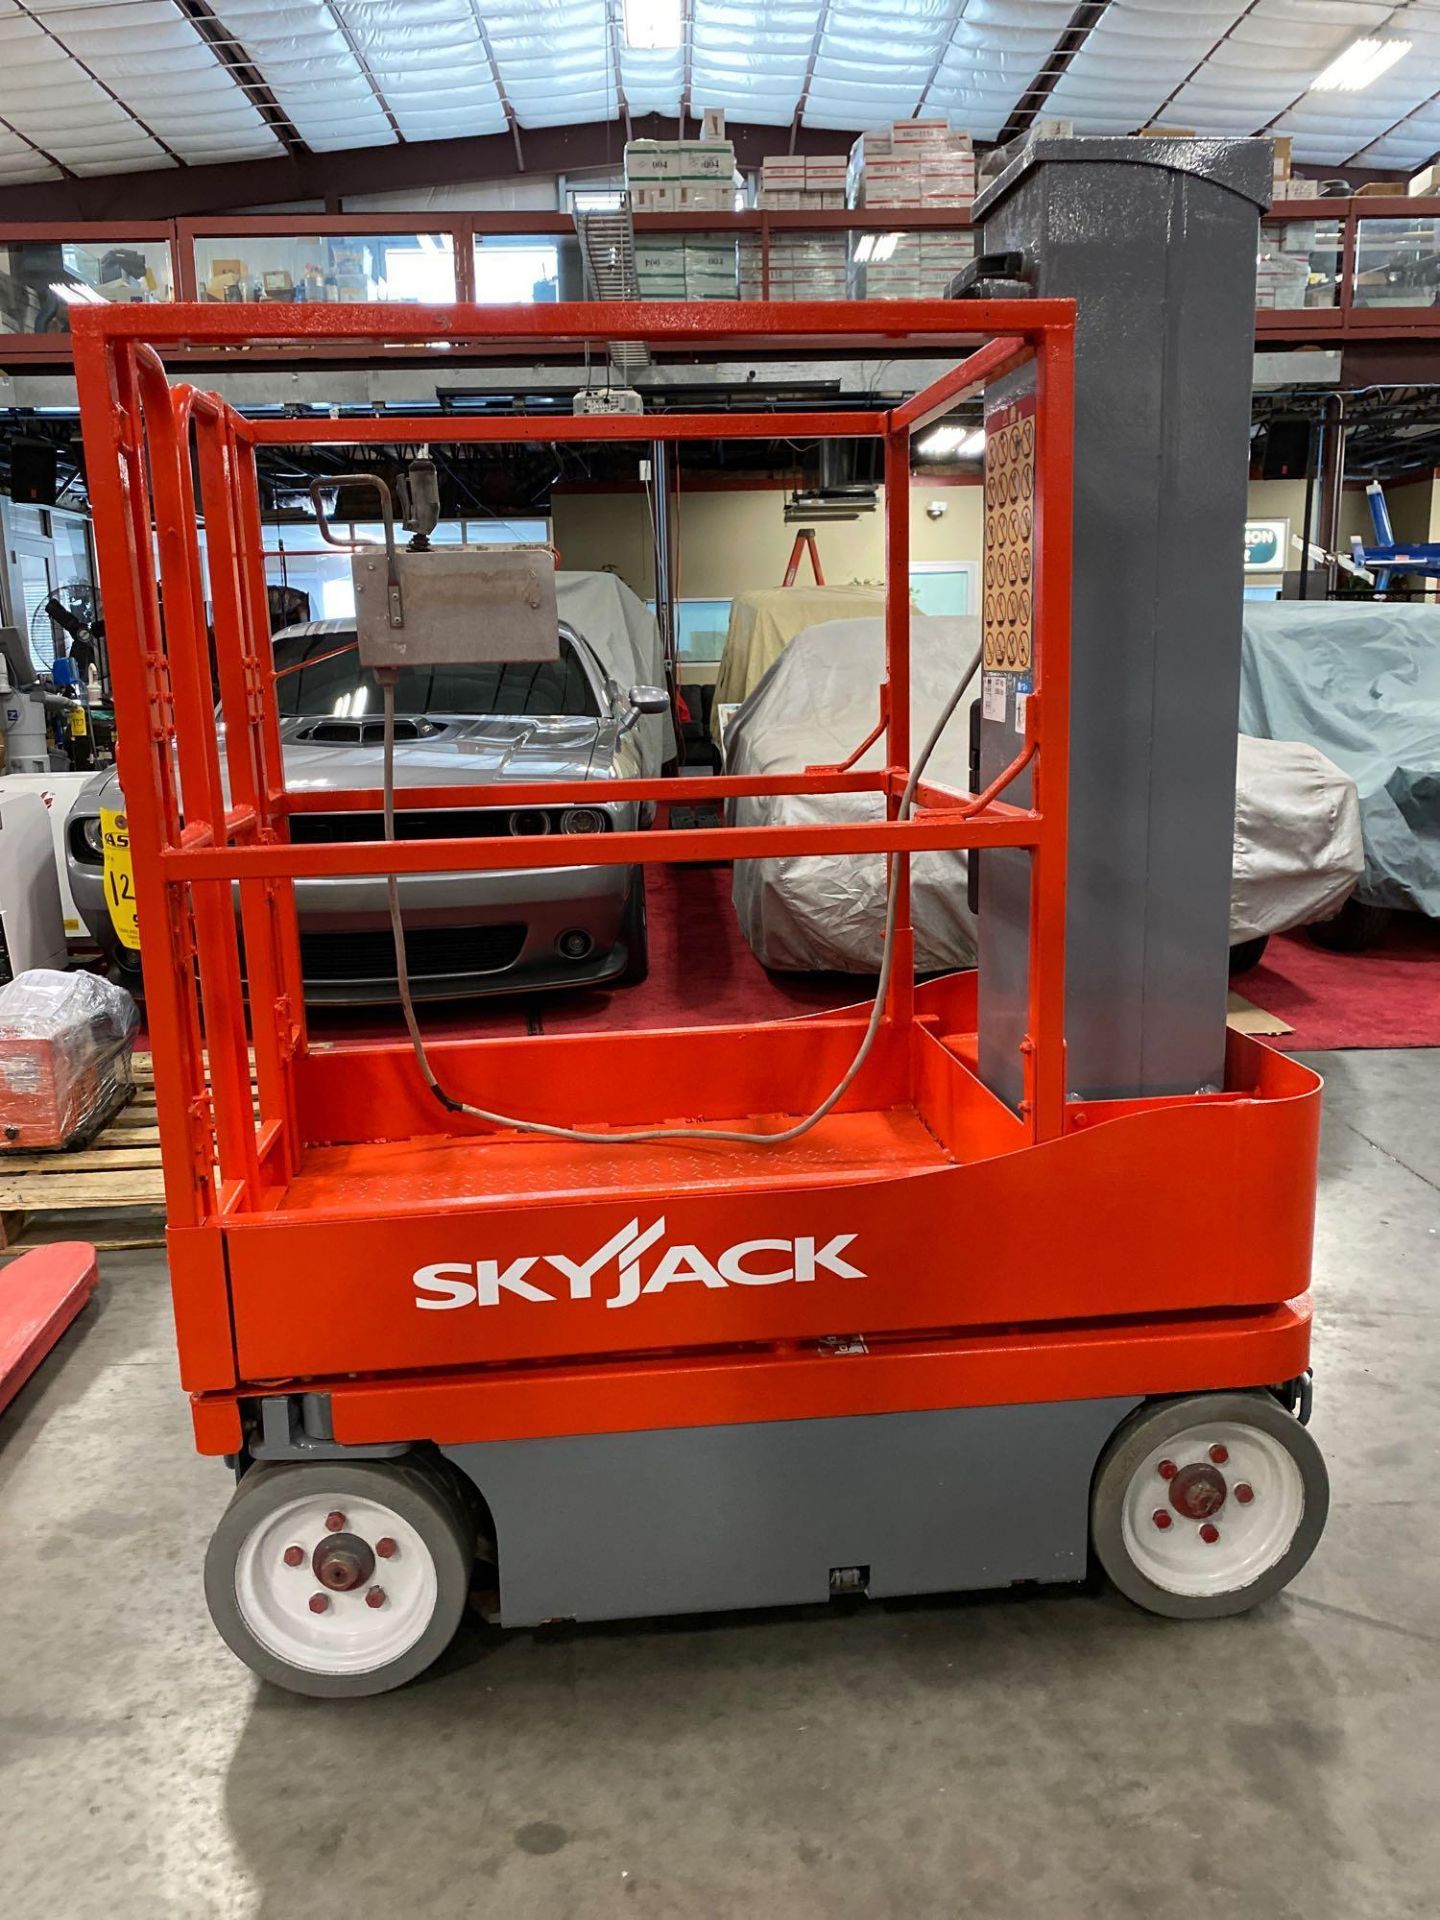 SKYJACK SJ12 ELECTRIC MAN LIFT, SELF PROPELLED, BUILT IN BATTERY CHARGER, 12' PLATFORM HEIGHT, 153 H - Image 4 of 14